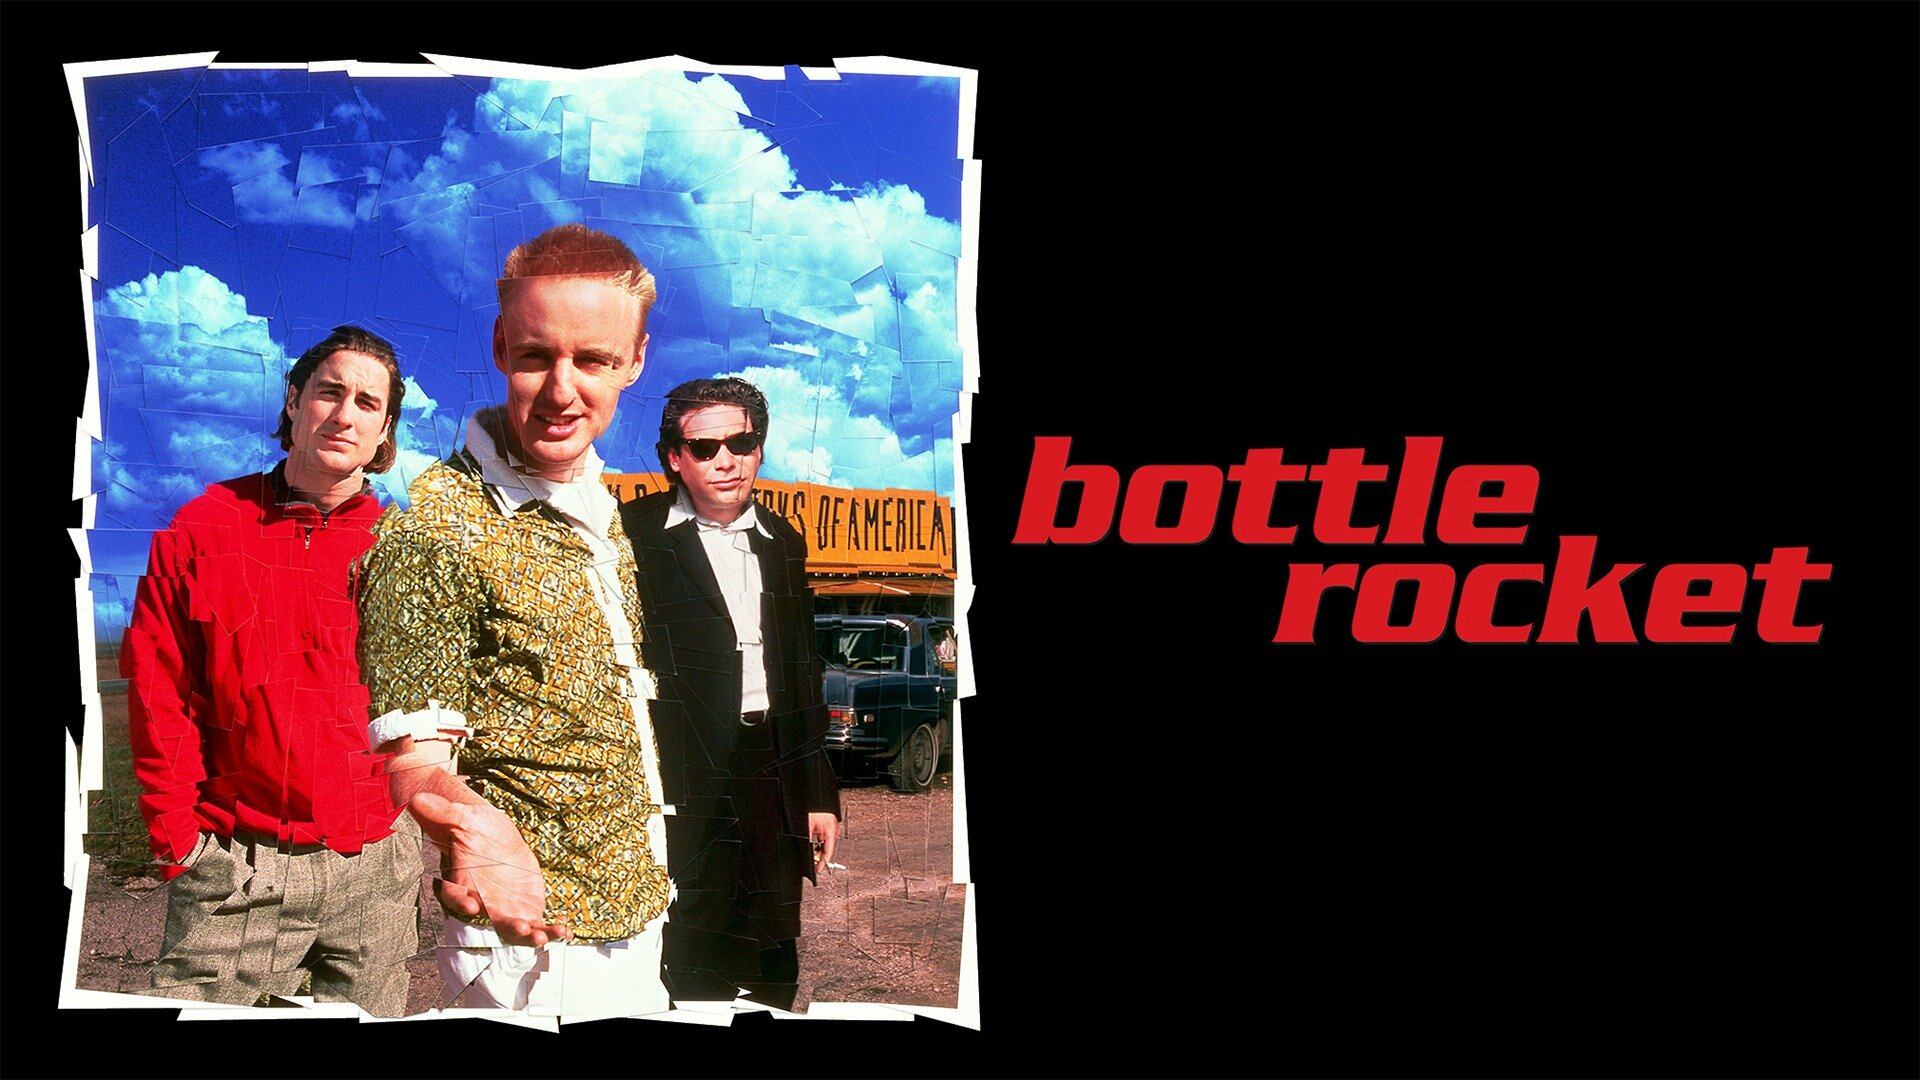 42-facts-about-the-movie-bottle-rocket